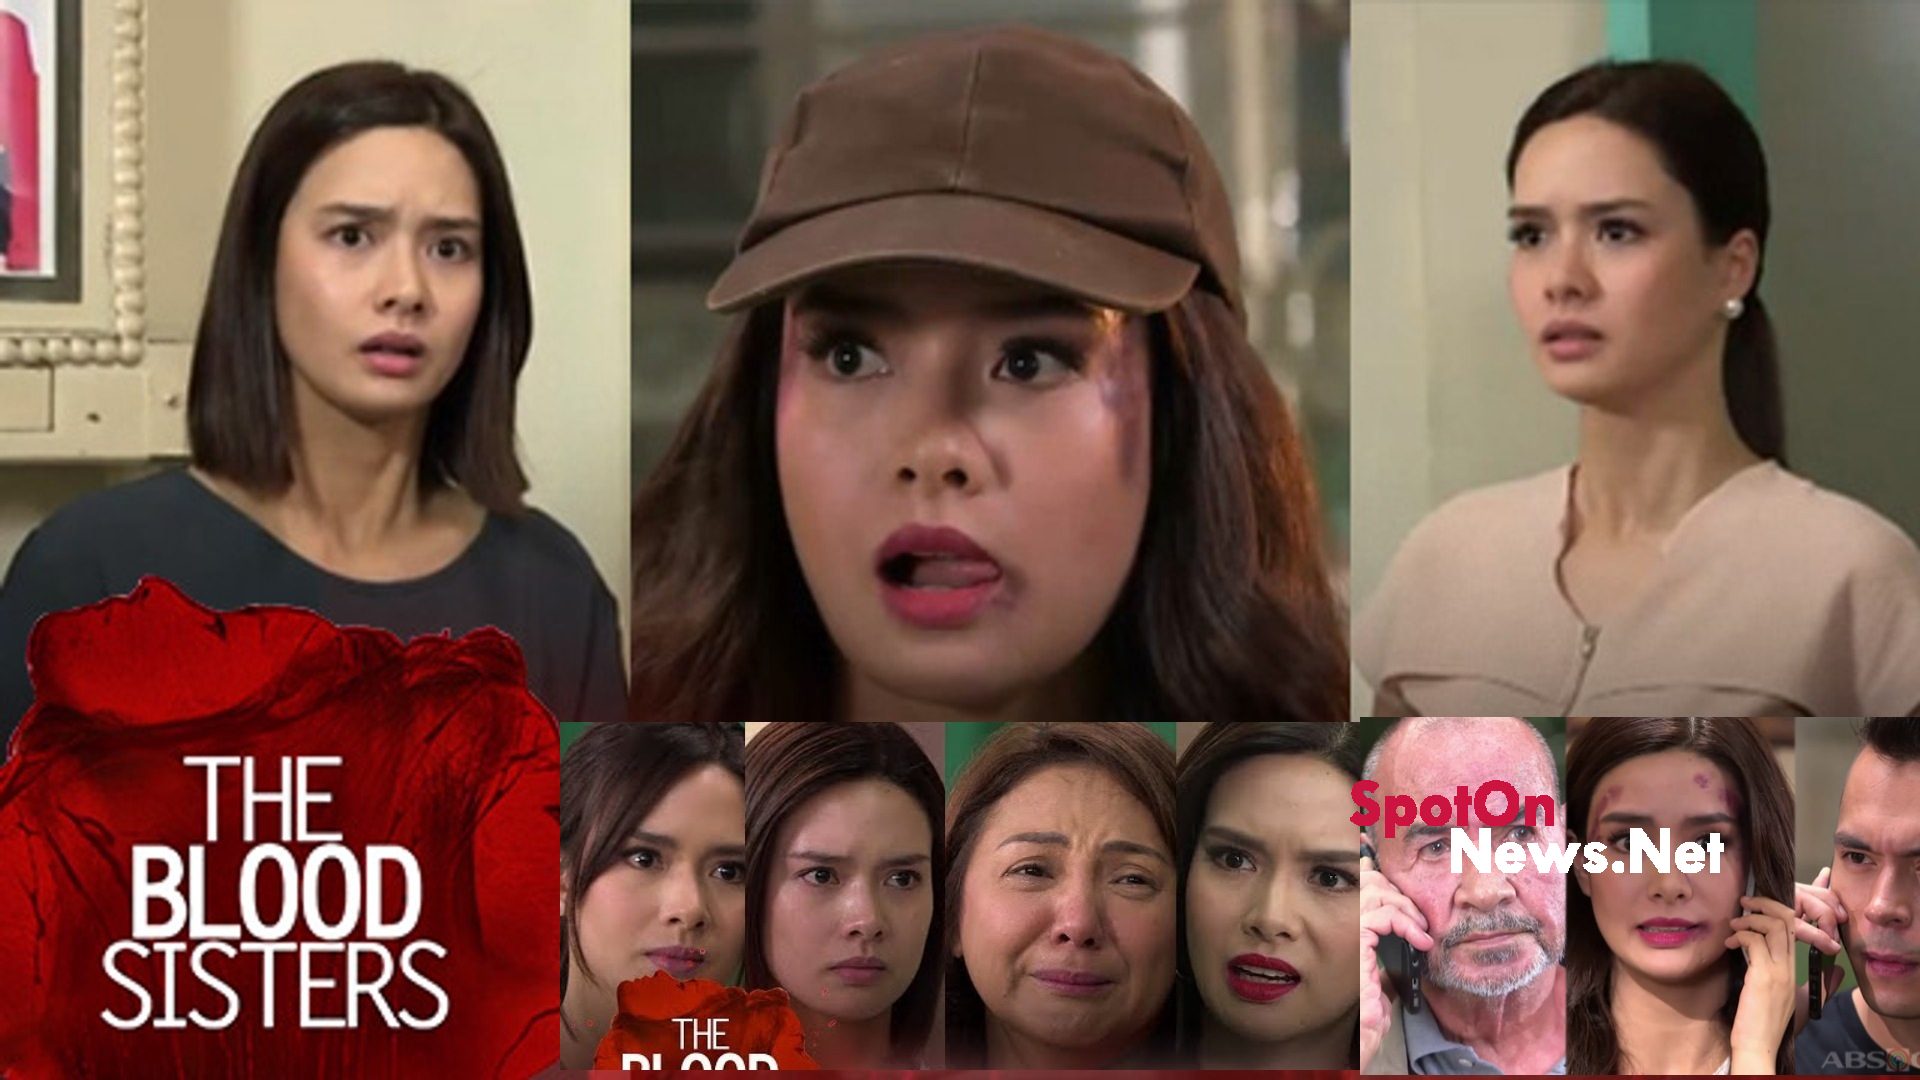 The Blood Sisters Episode 69 Erika, Carrie, Agatha plot to end Rocco and Fabian to save Adele